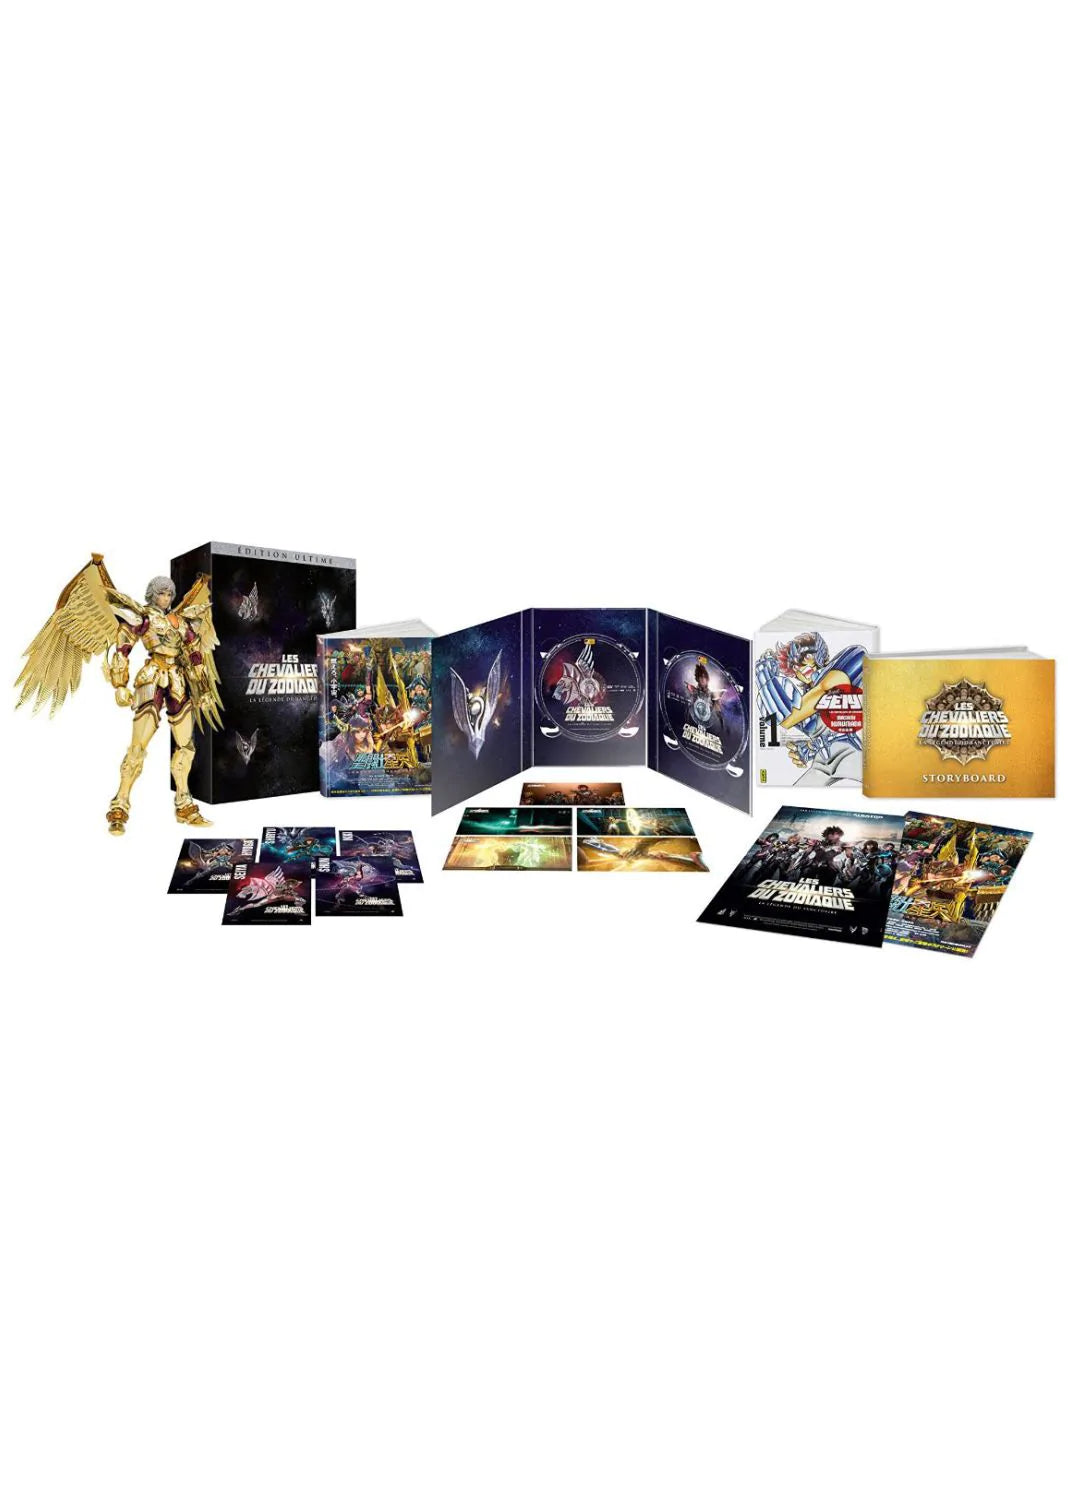 Chevaliers du Zodiaque Edition Ultime + Figurine - Combo DVD + Bluray